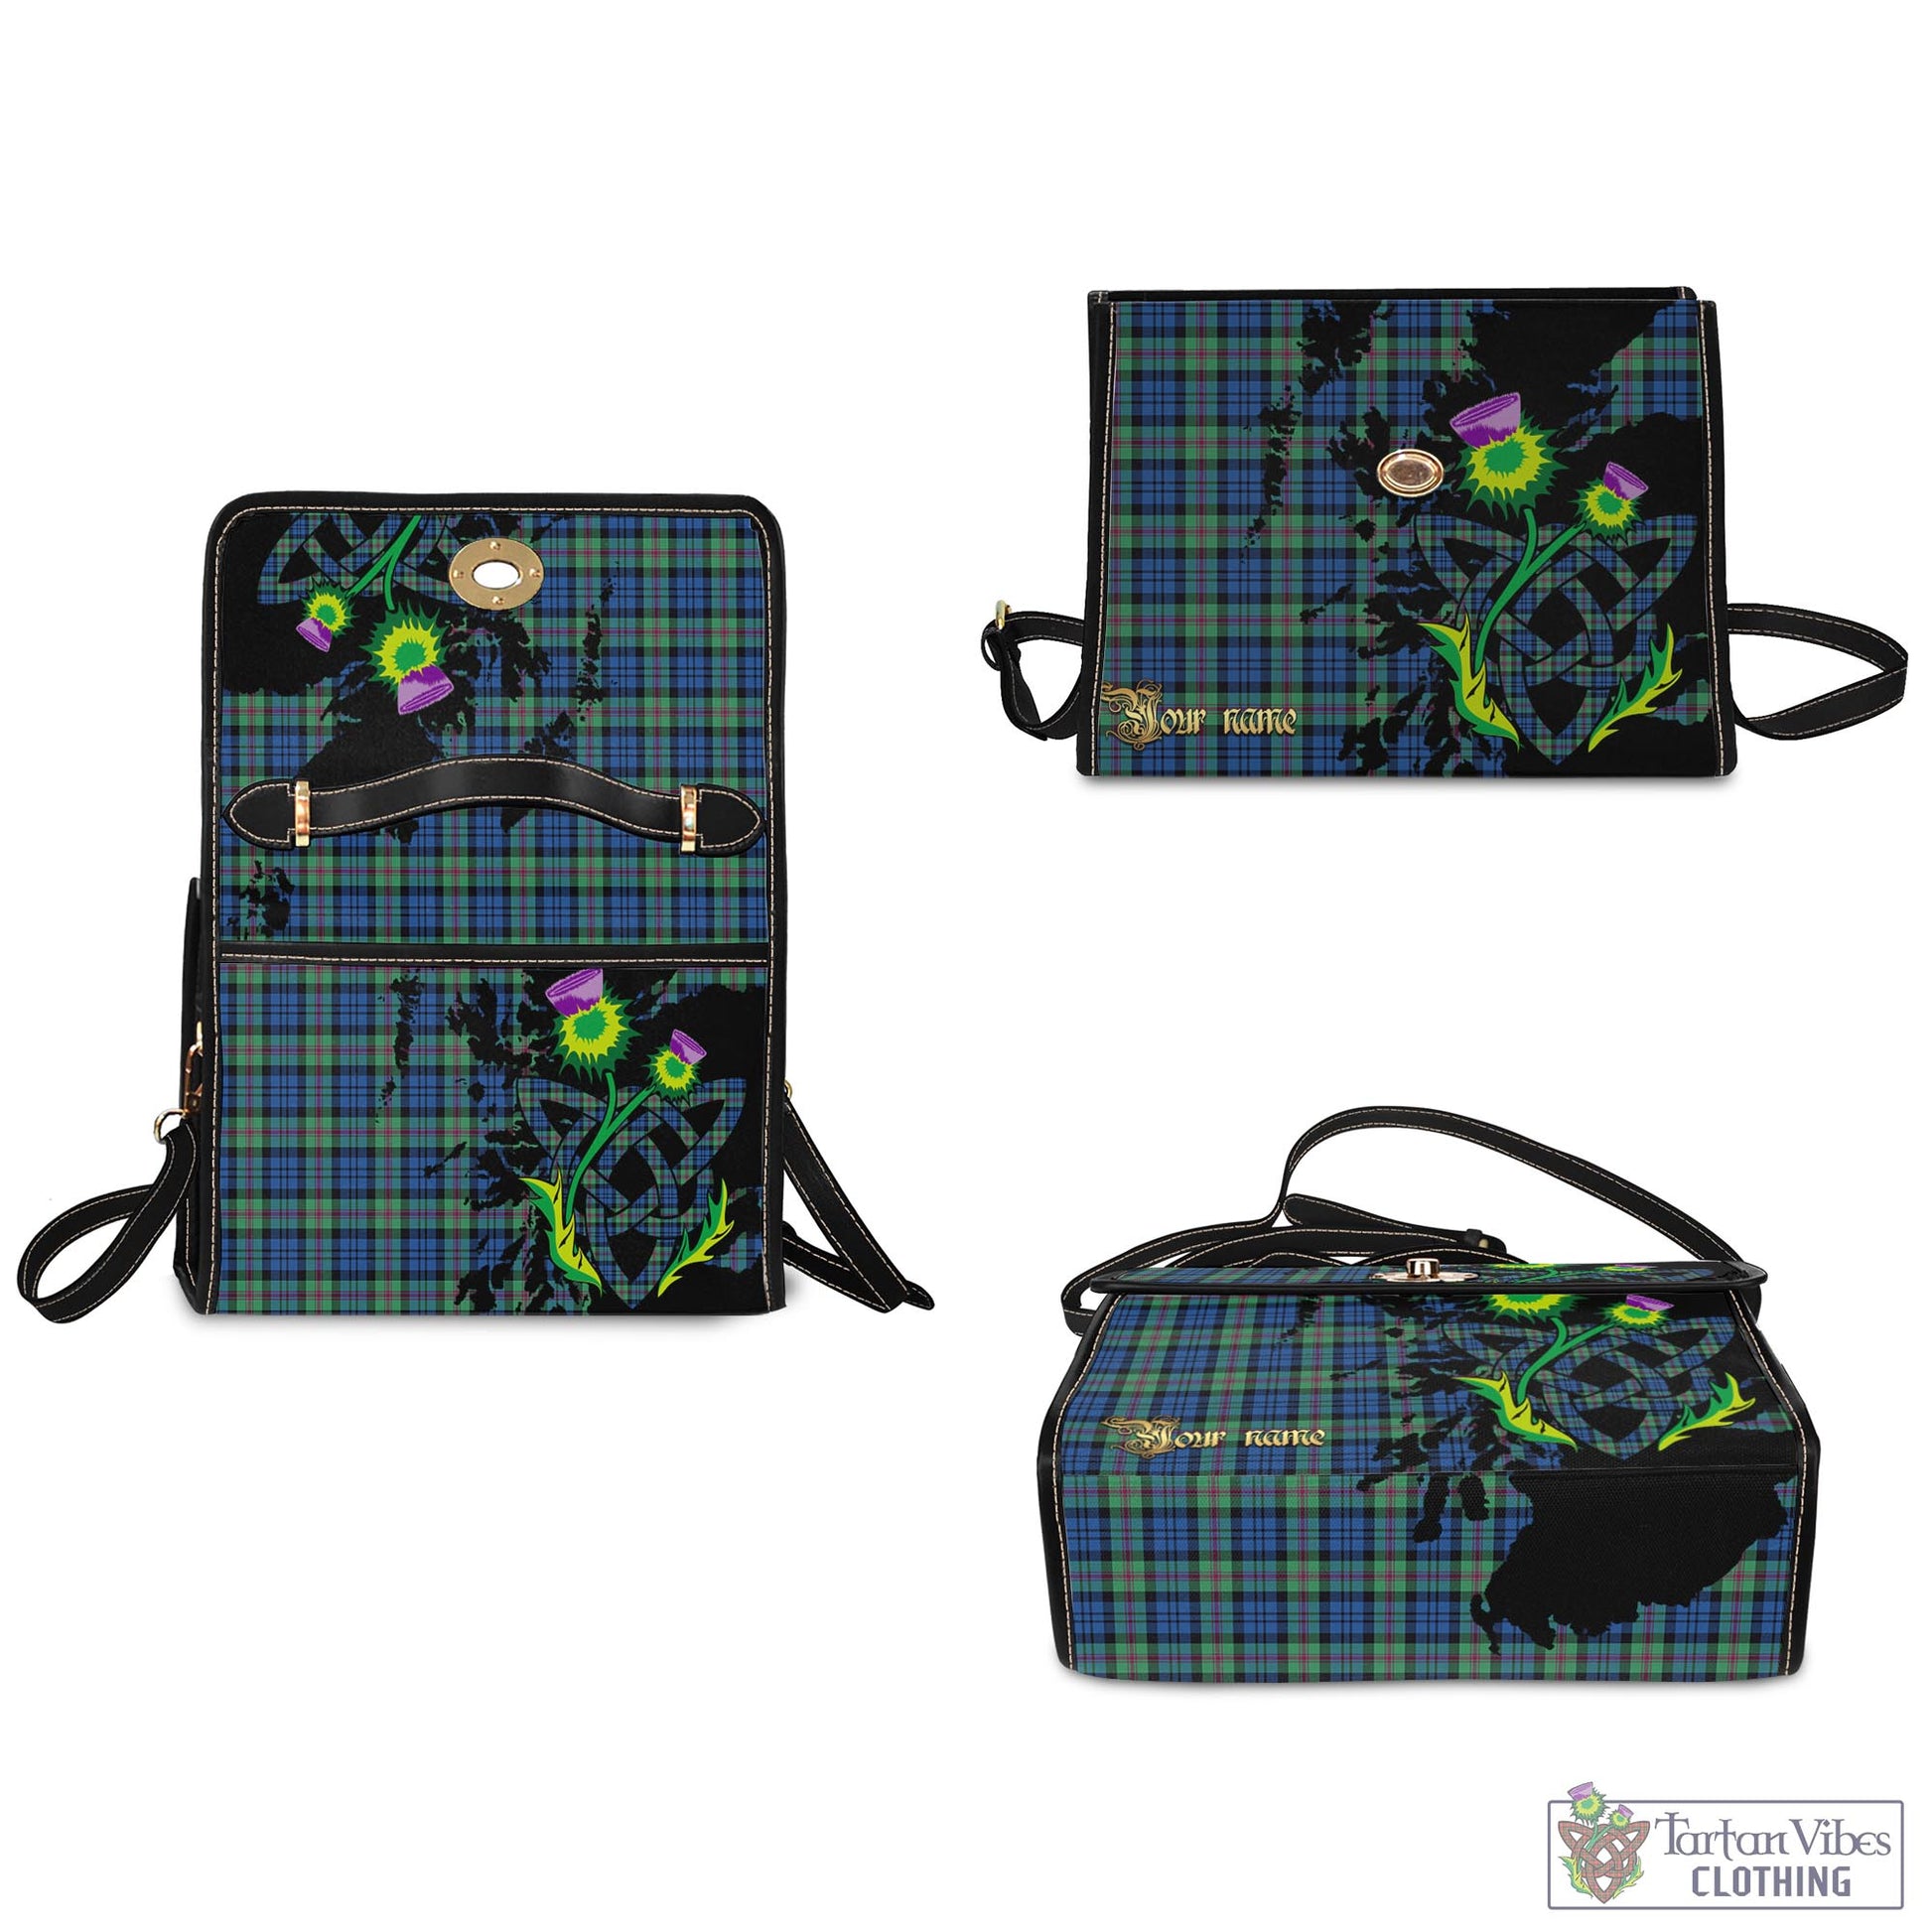 Tartan Vibes Clothing Baird Ancient Tartan Waterproof Canvas Bag with Scotland Map and Thistle Celtic Accents